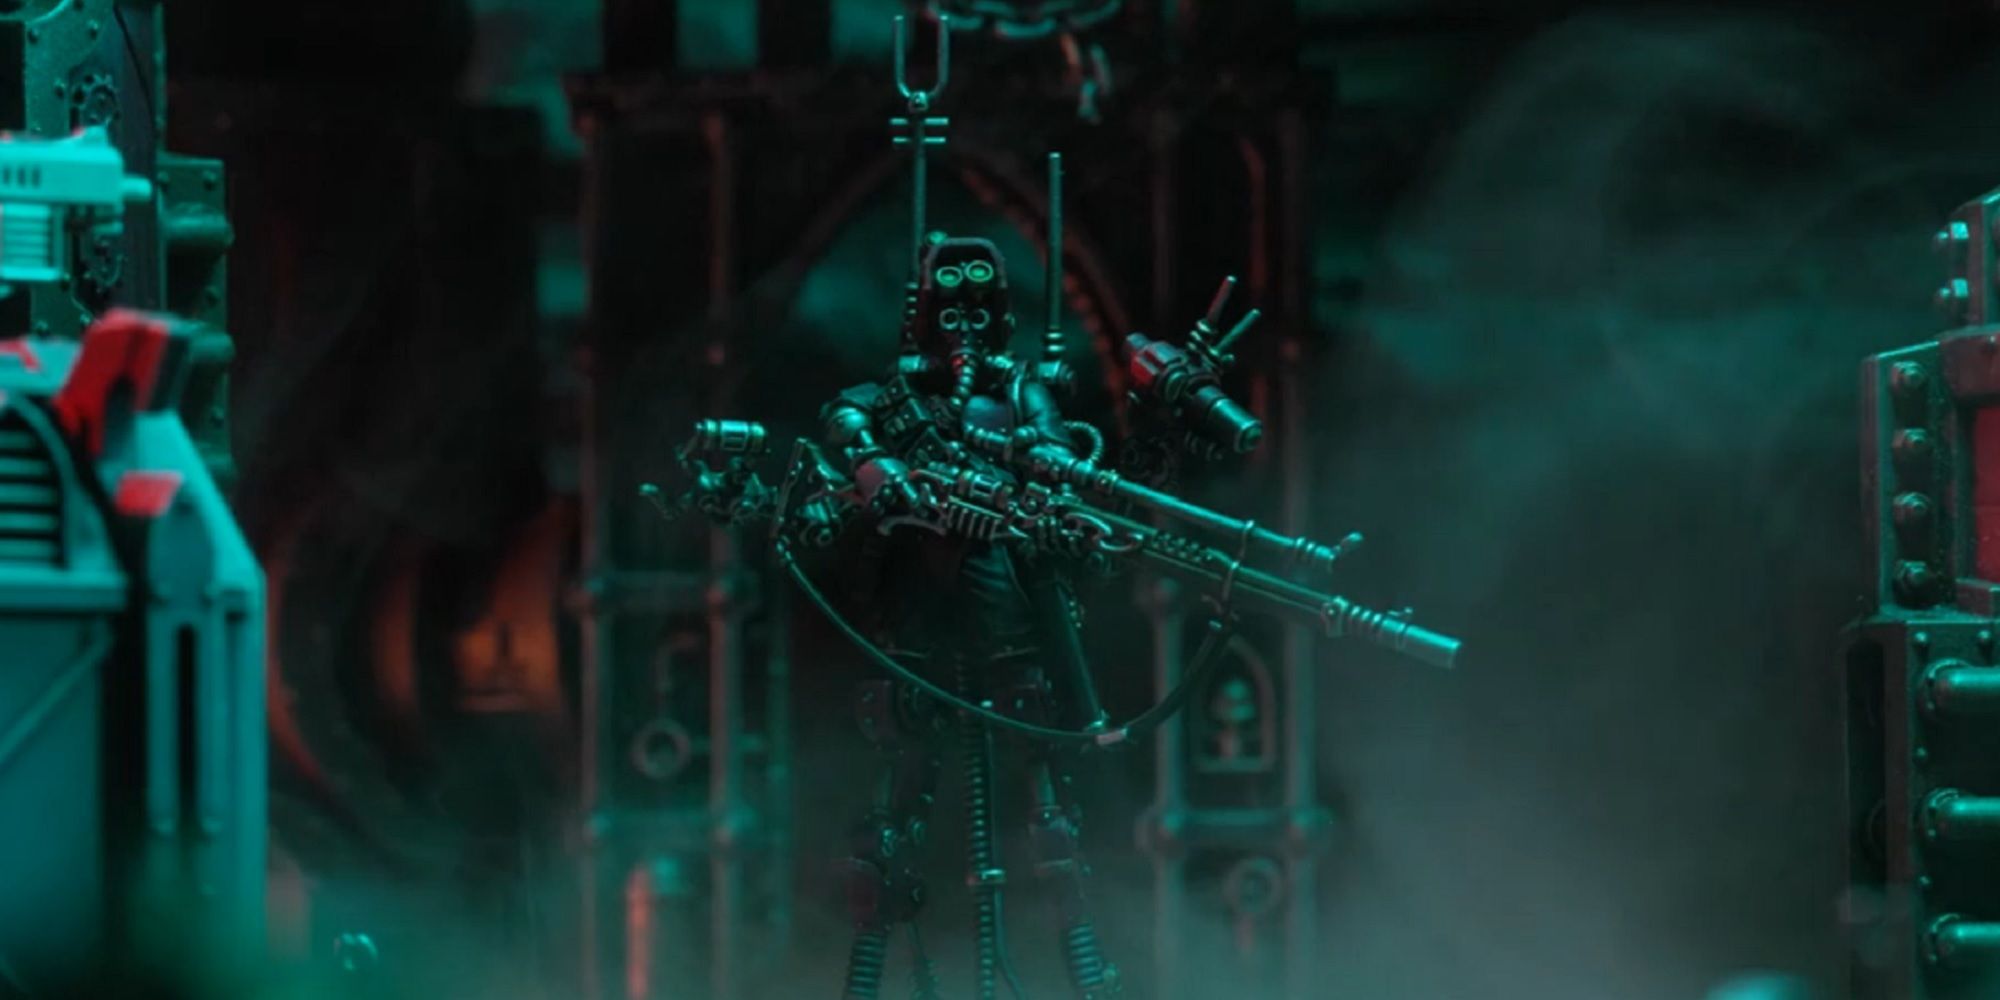 The Best Adeptus Mechanicus Model Kits To Buy For Warhammer 40,000